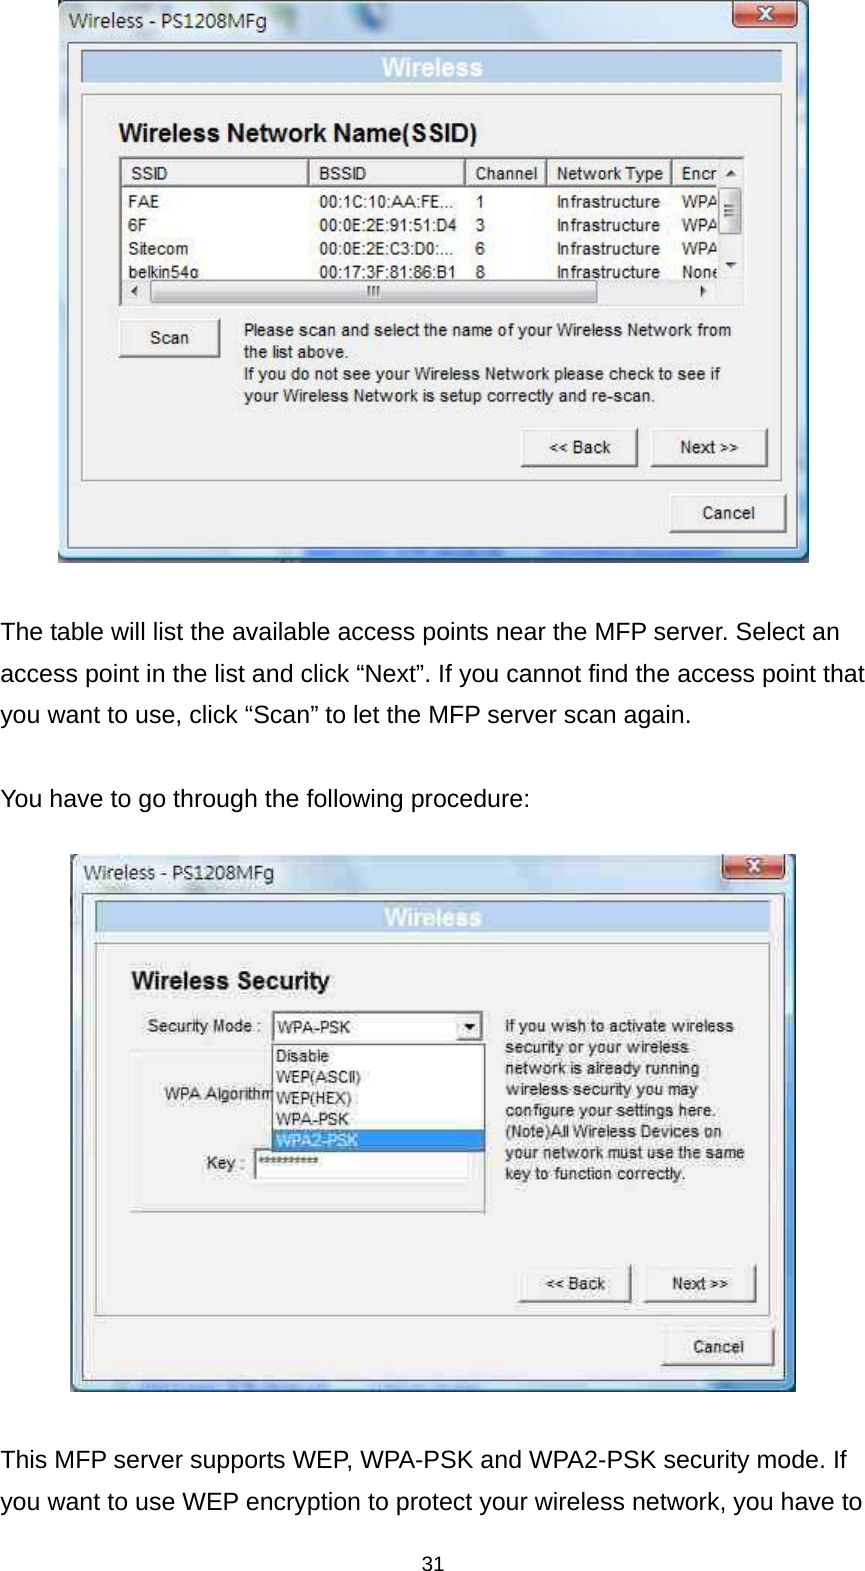 31   The table will list the available access points near the MFP server. Select an access point in the list and click “Next”. If you cannot find the access point that you want to use, click “Scan” to let the MFP server scan again.  You have to go through the following procedure:    This MFP server supports WEP, WPA-PSK and WPA2-PSK security mode. If you want to use WEP encryption to protect your wireless network, you have to 